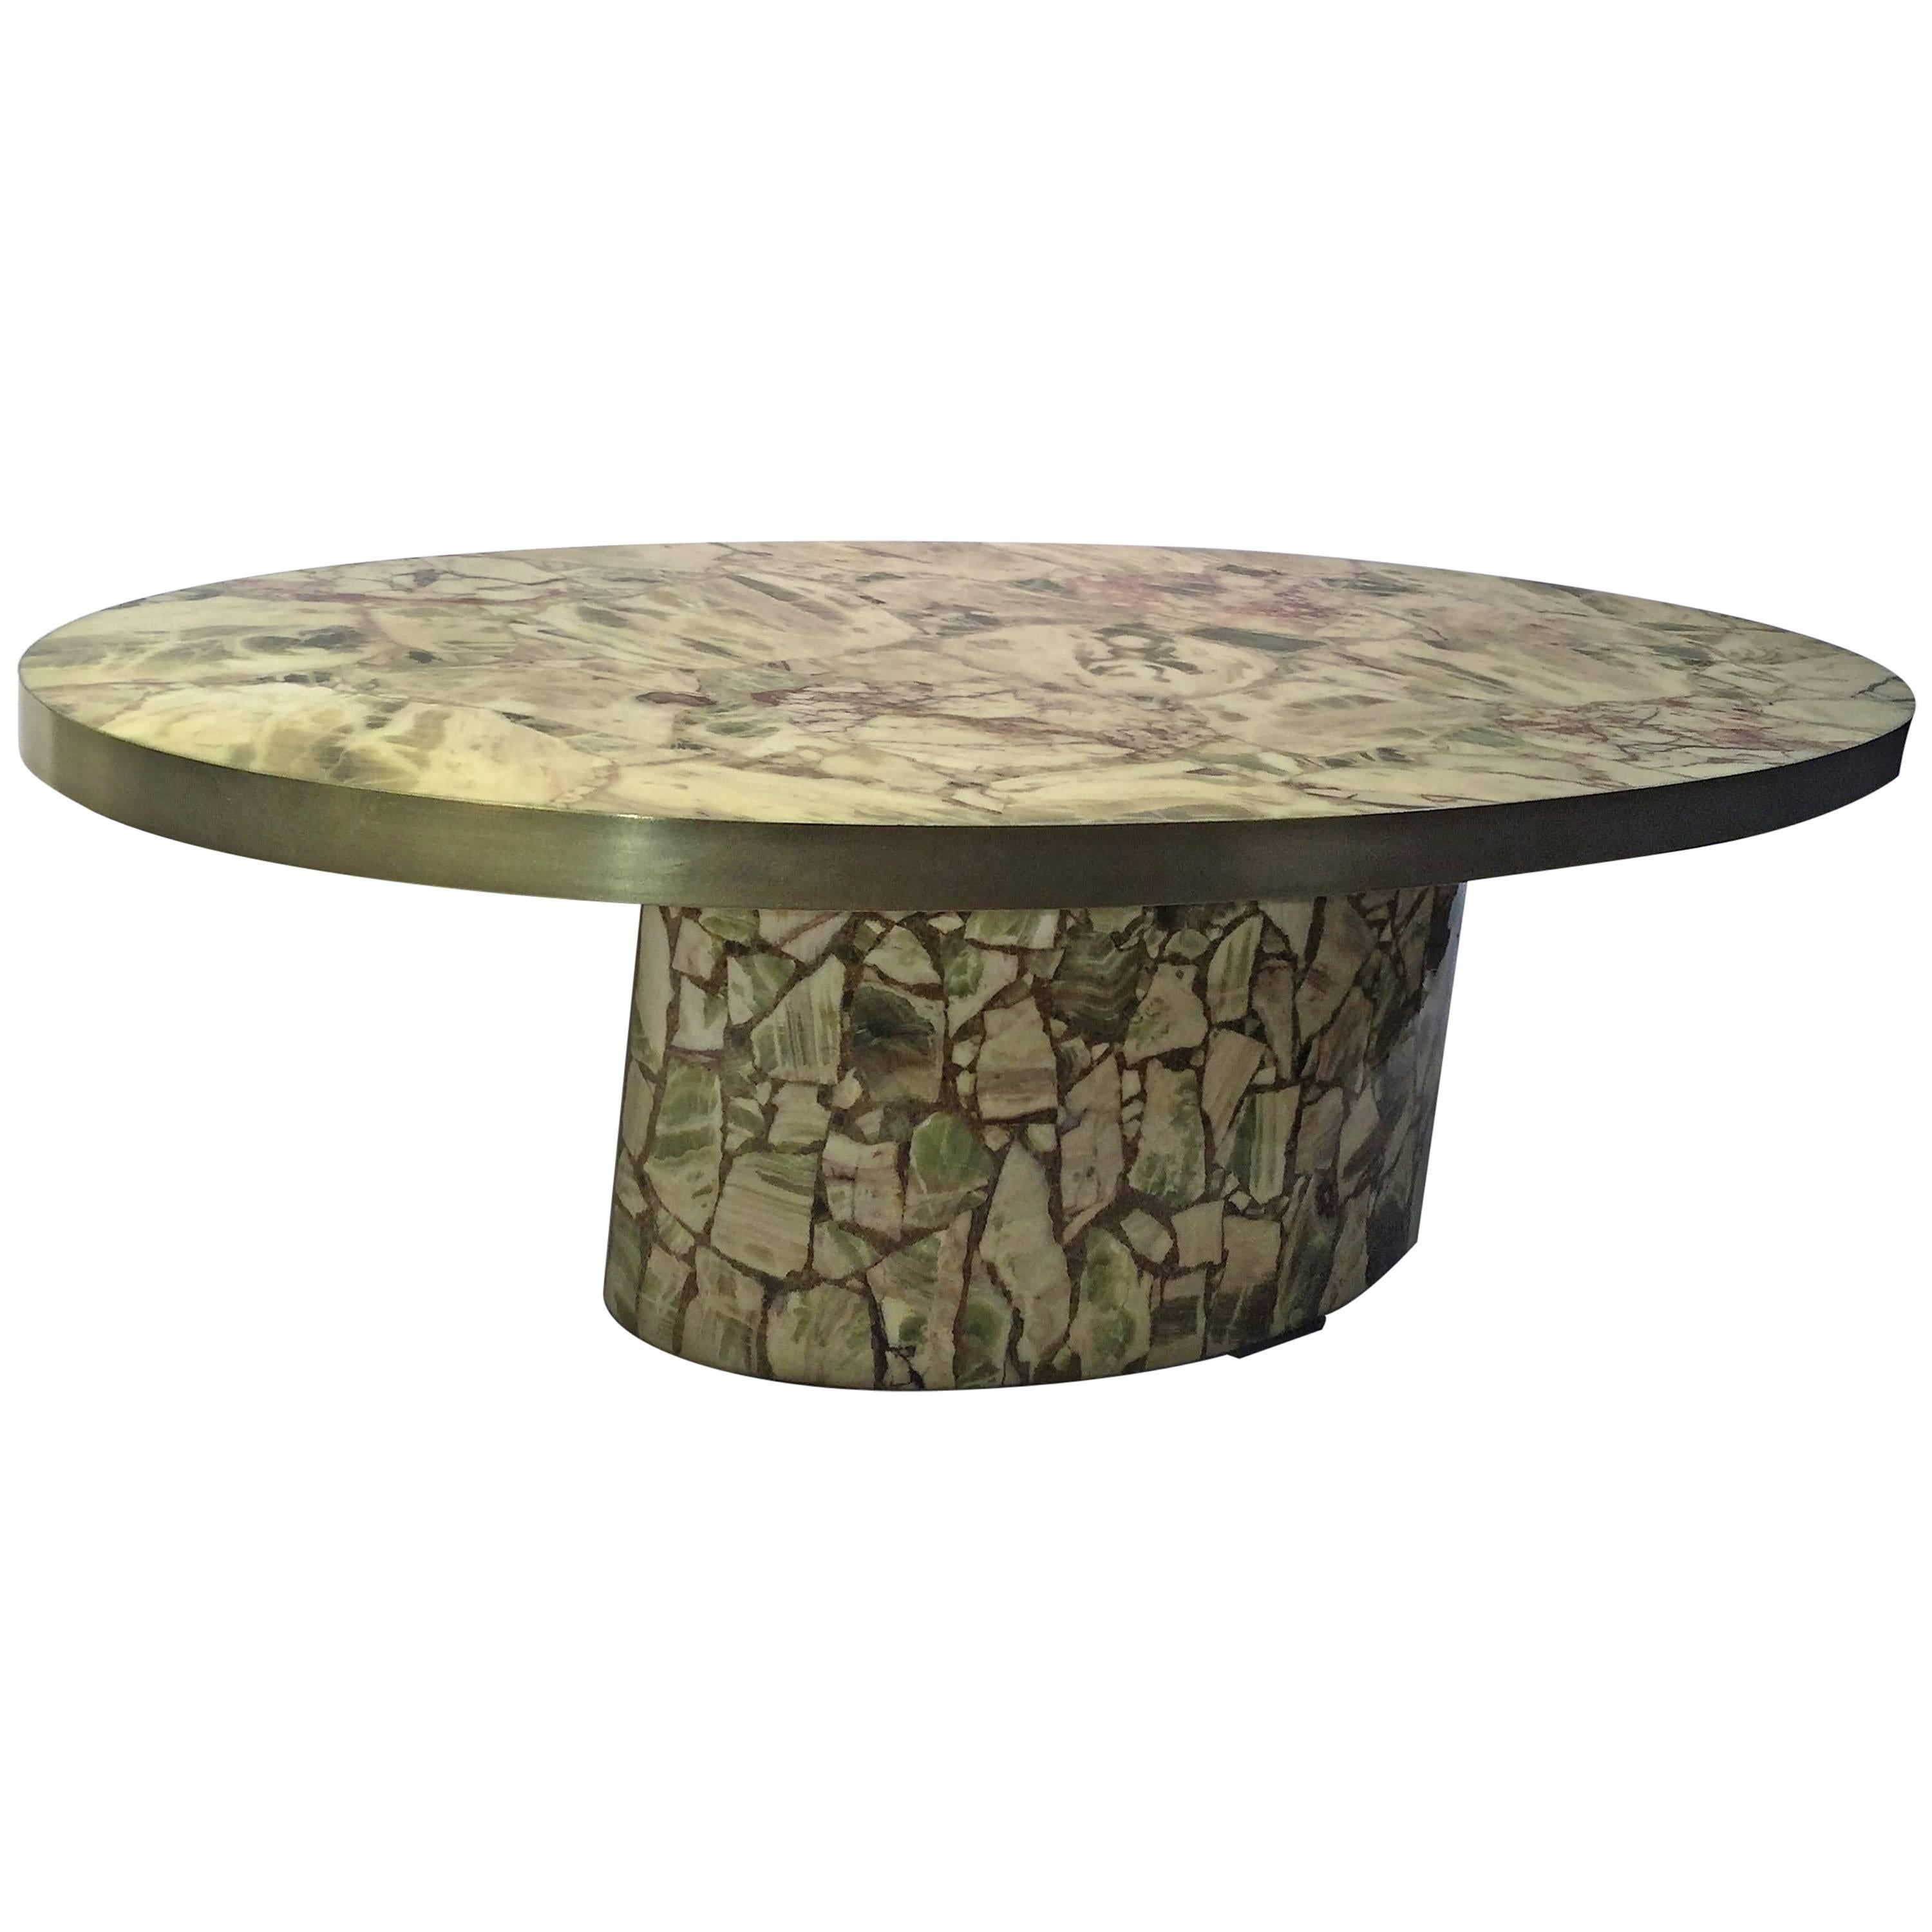  Gorgeous Modernistic Italian Fractured Green Onyx Resin Coffee Table For Sale